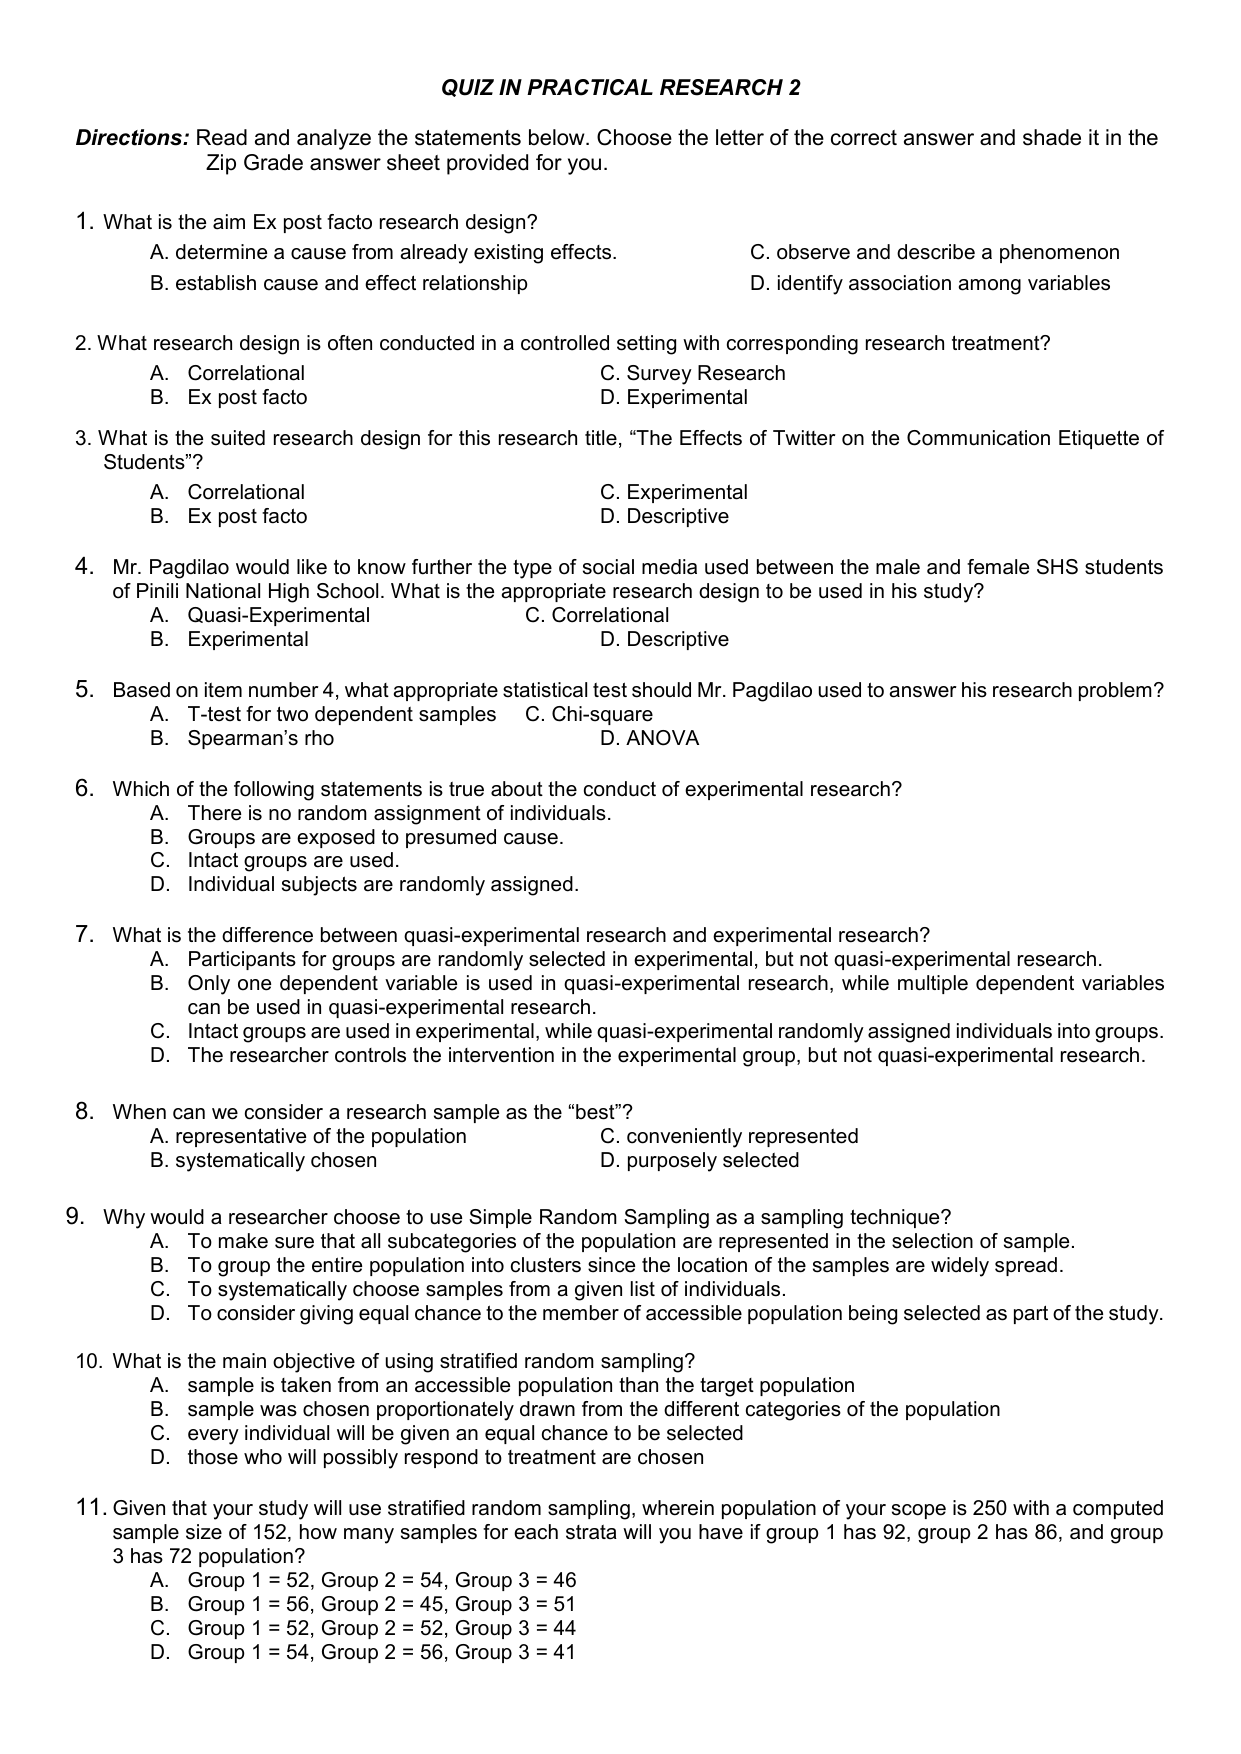 sample exam questions on research methods